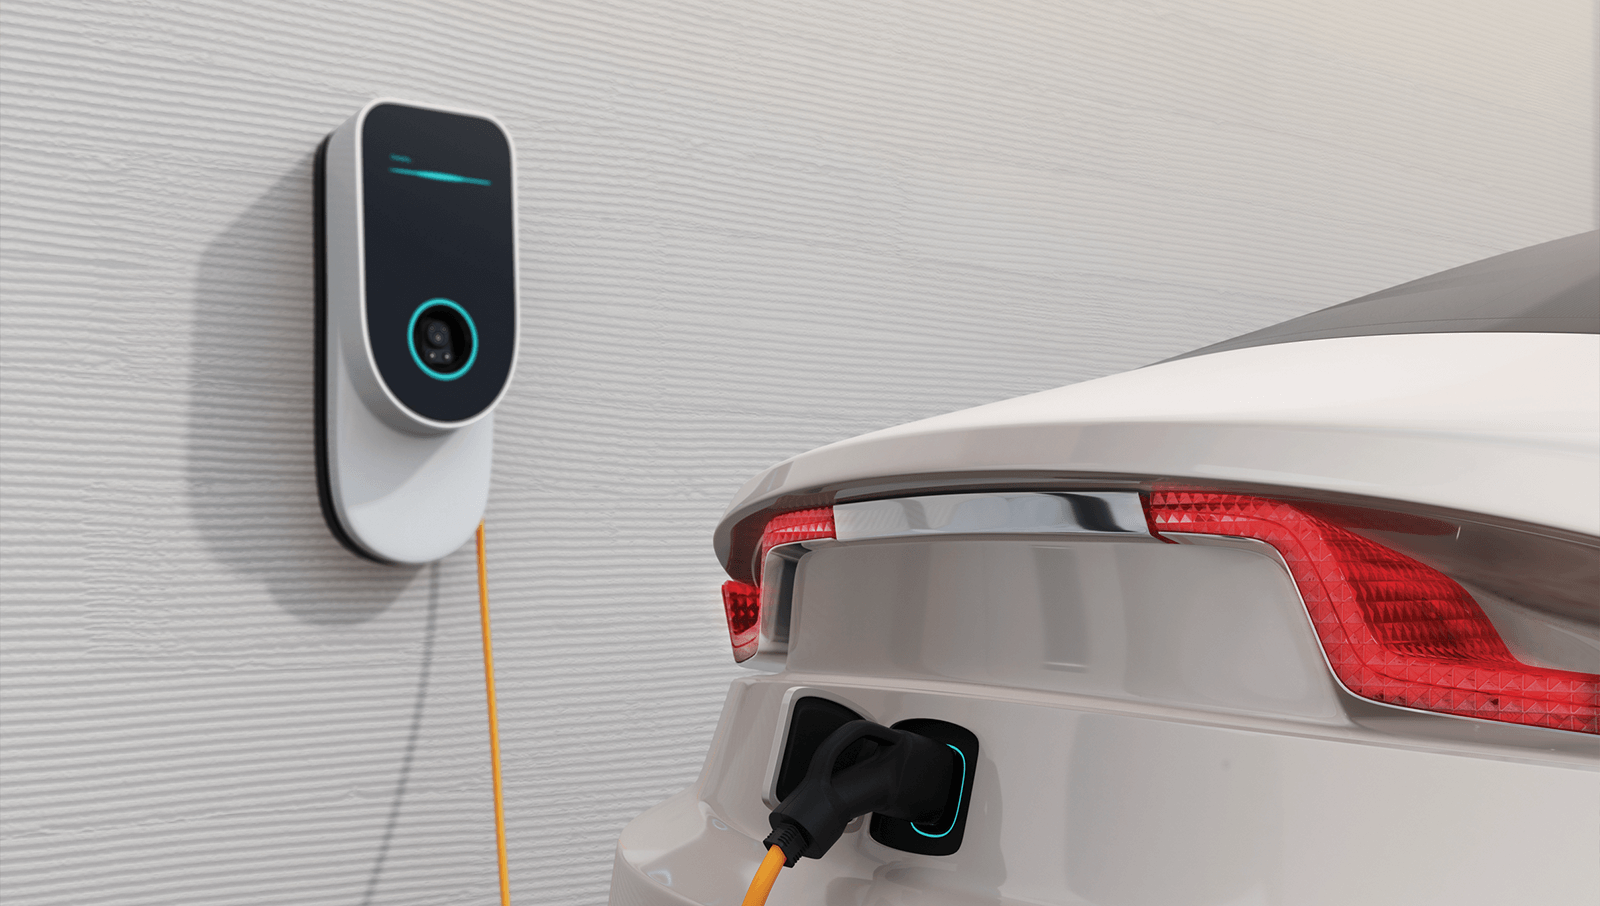 All about ev home chargers, and ev charging suppliers